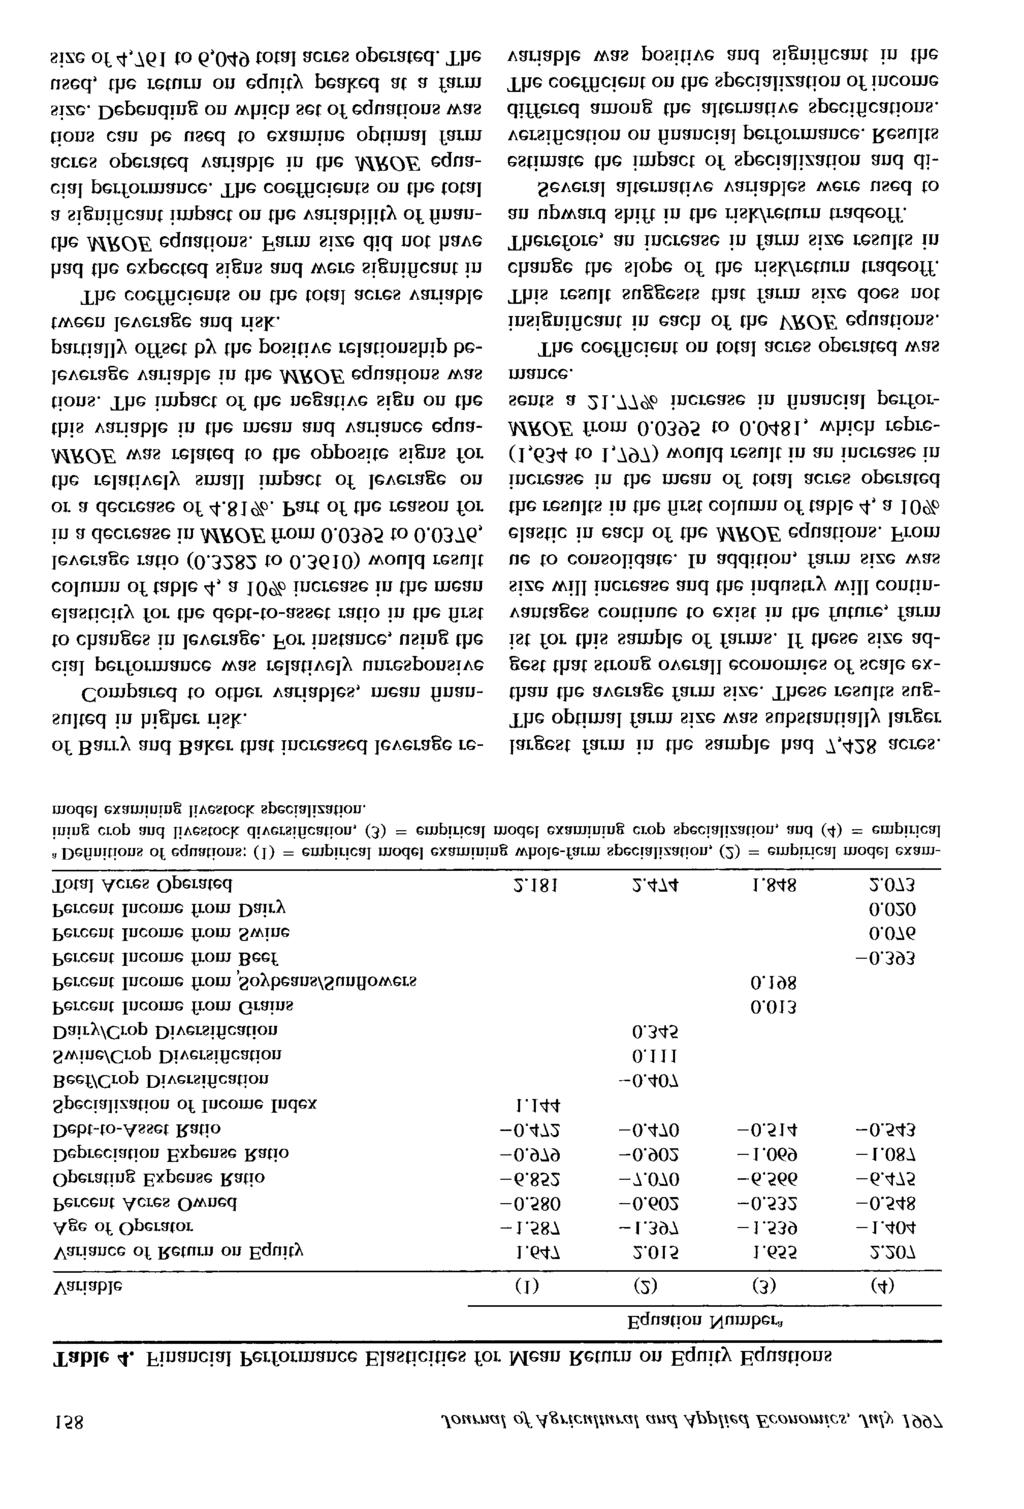 158 Journal of Agricultural and Applied Economics, July 1997 Table 4.